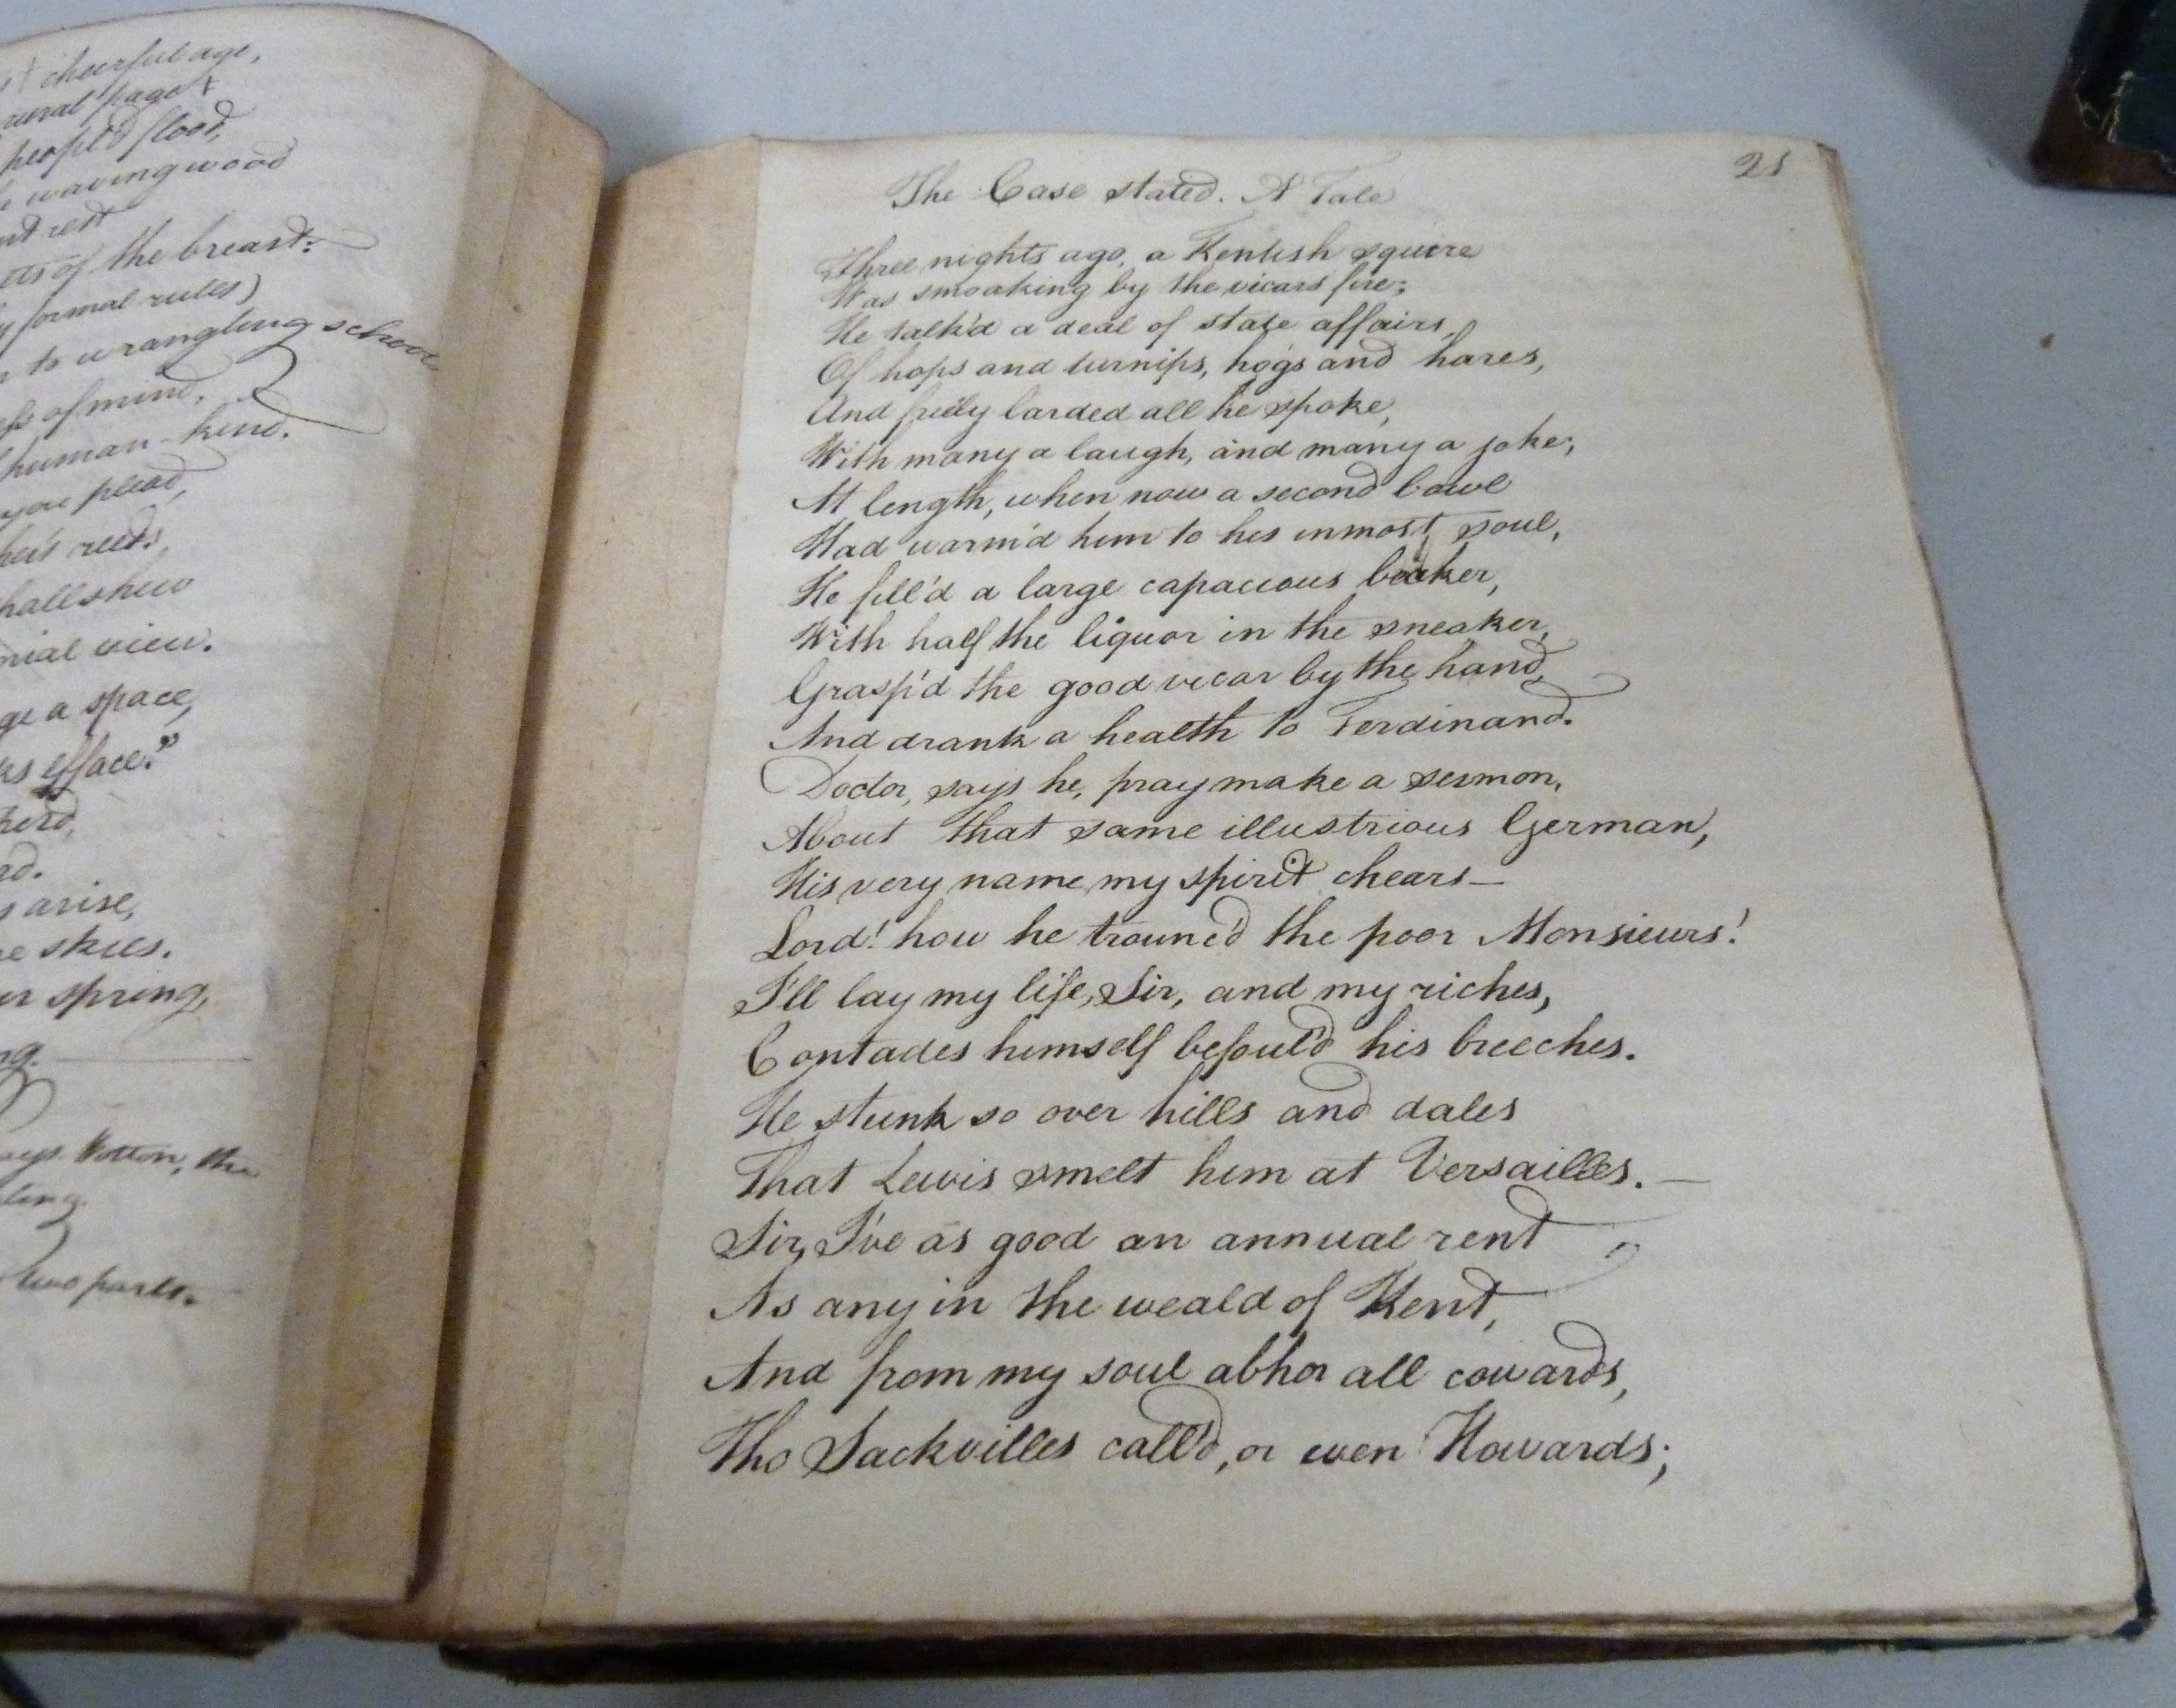 BEALE DR. Dialogues (on astronomy). 6pp manuscript "extract" in a square 128pp 18th cent. notebook & - Image 3 of 4